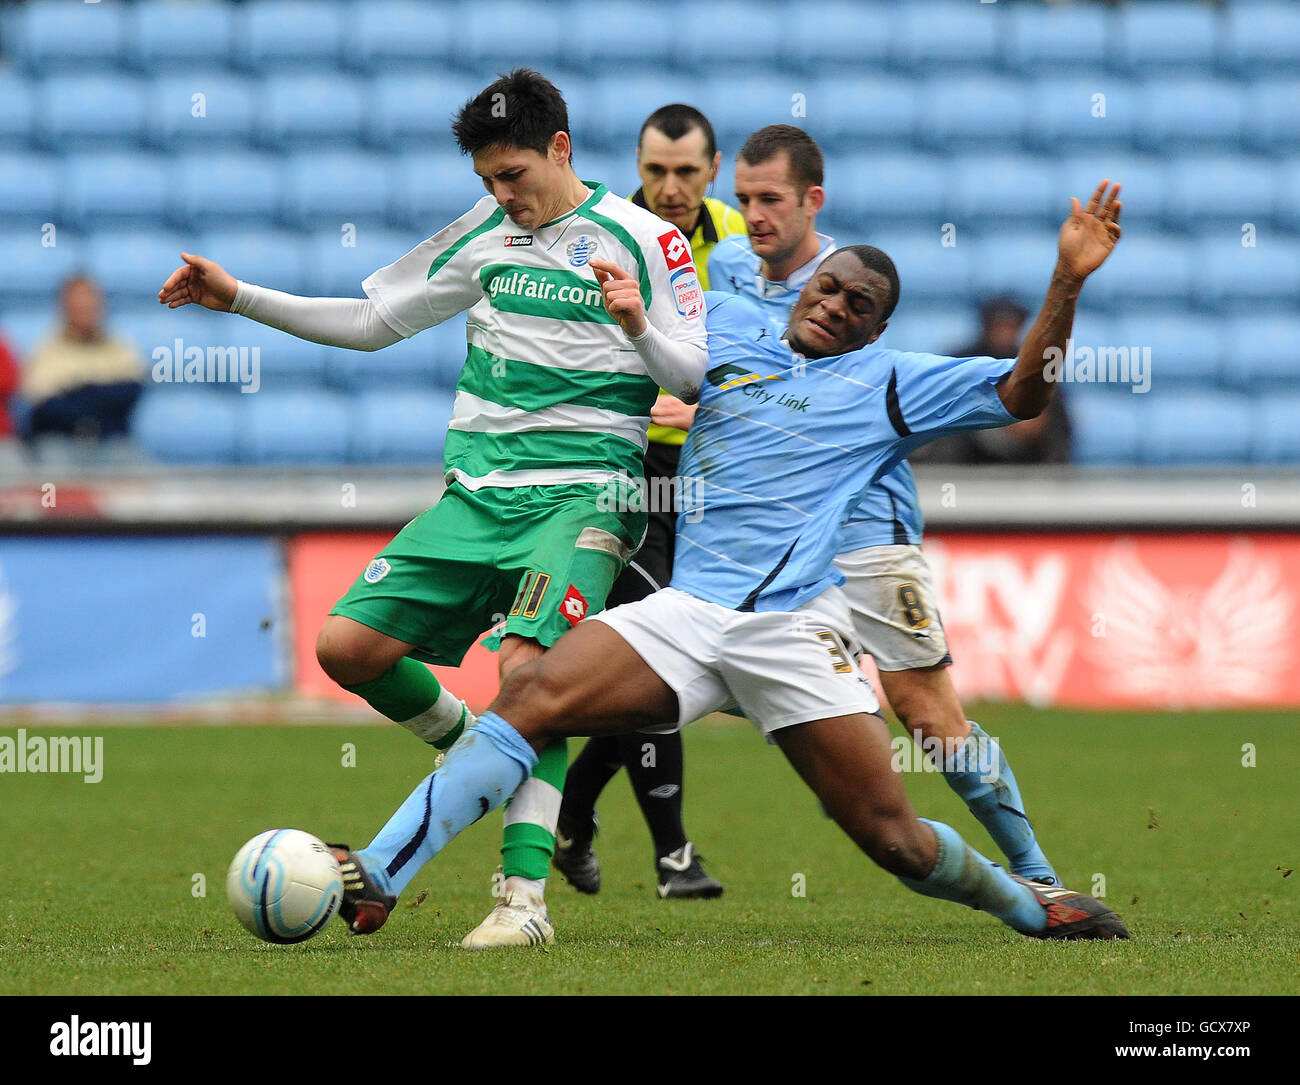 Coventry City's Nathan Cameron tackles Queens Park Rangers' Alejandro Faurlin (left) during the npower Championship match at the Ricoh Arena, Coventry. Stock Photo